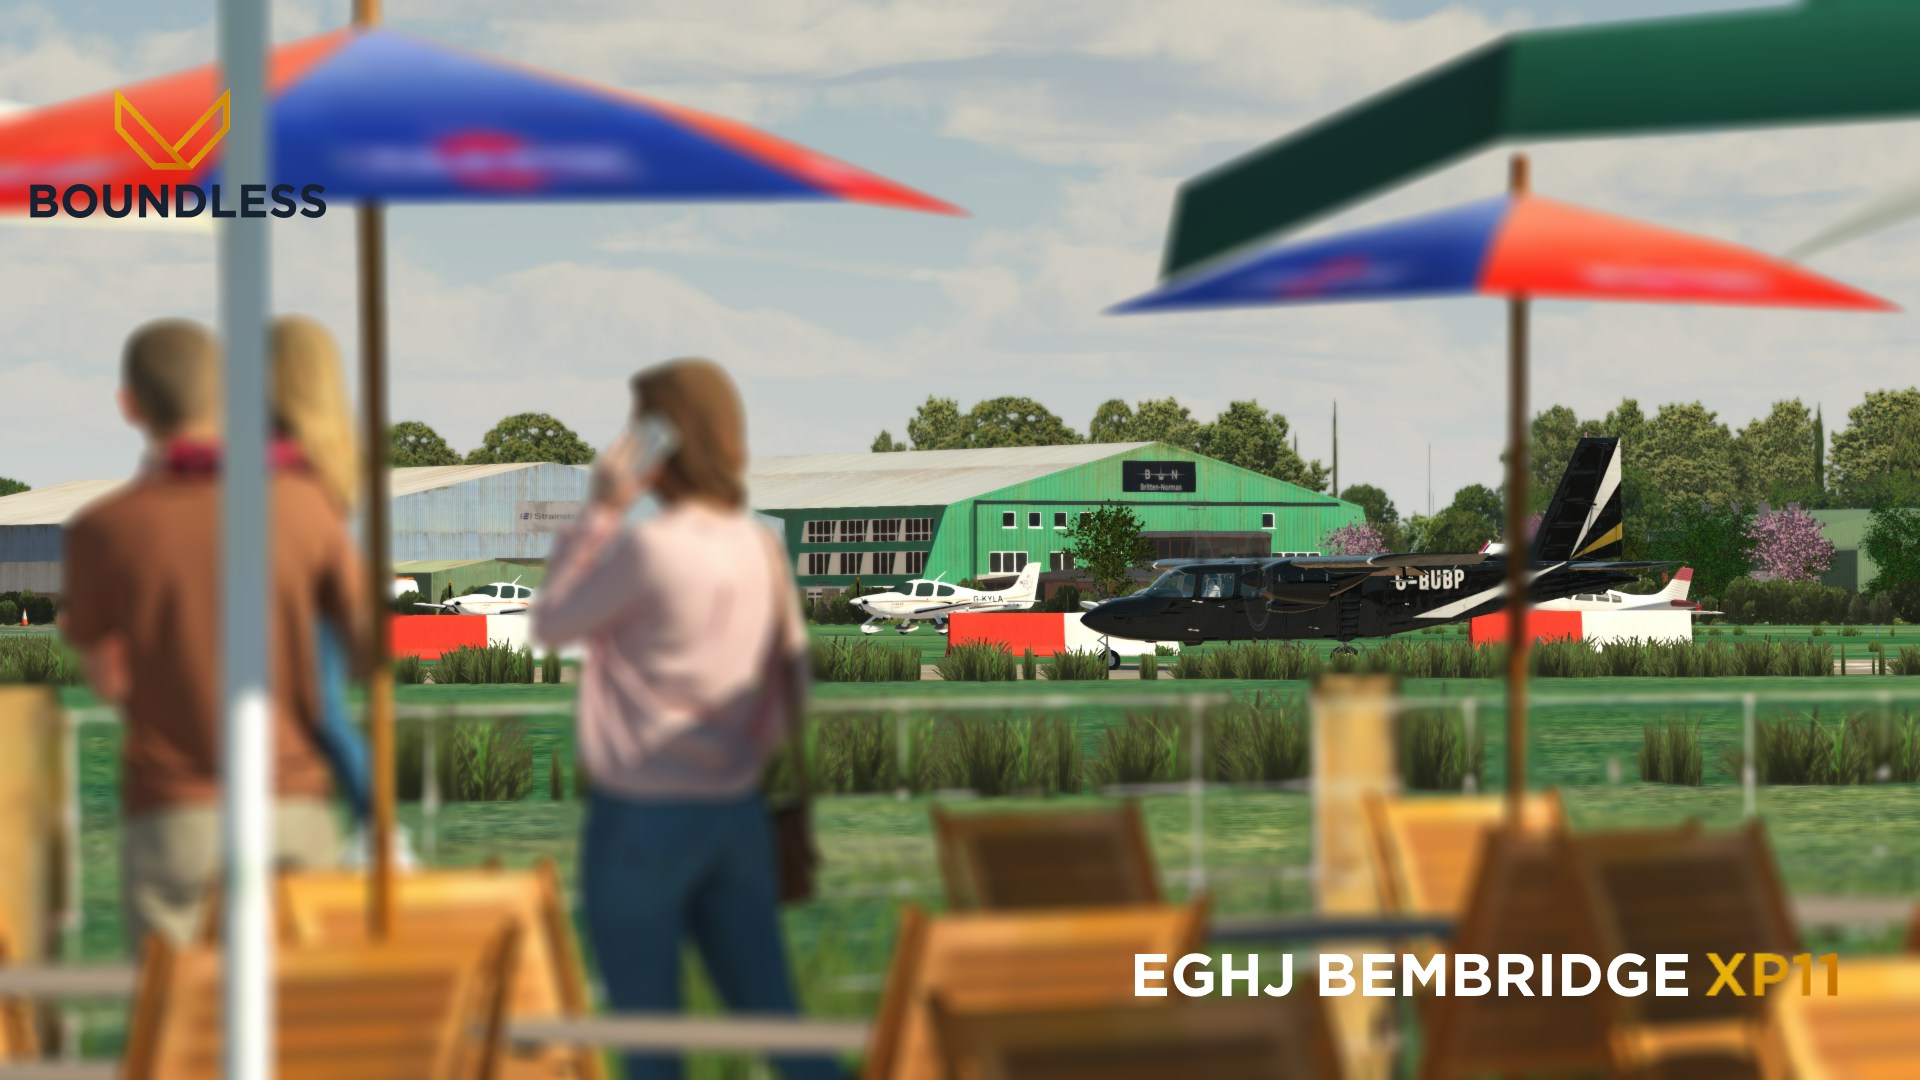 Boundless Releases Bembridge Airfield for XP11